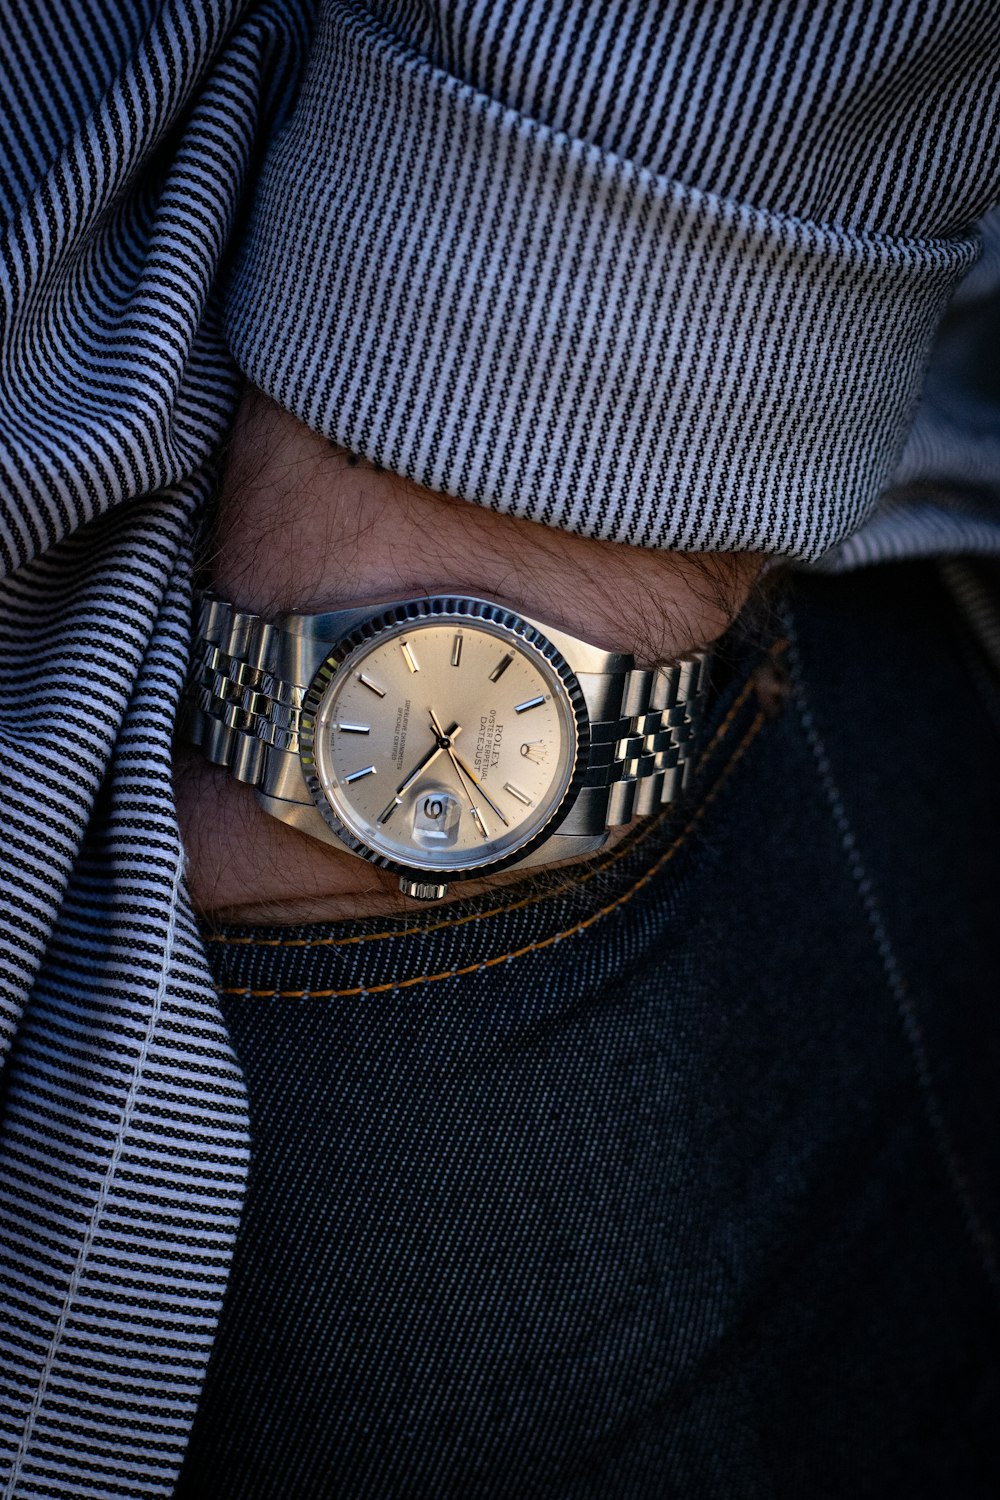 person wearing silver link bracelet round analog watch